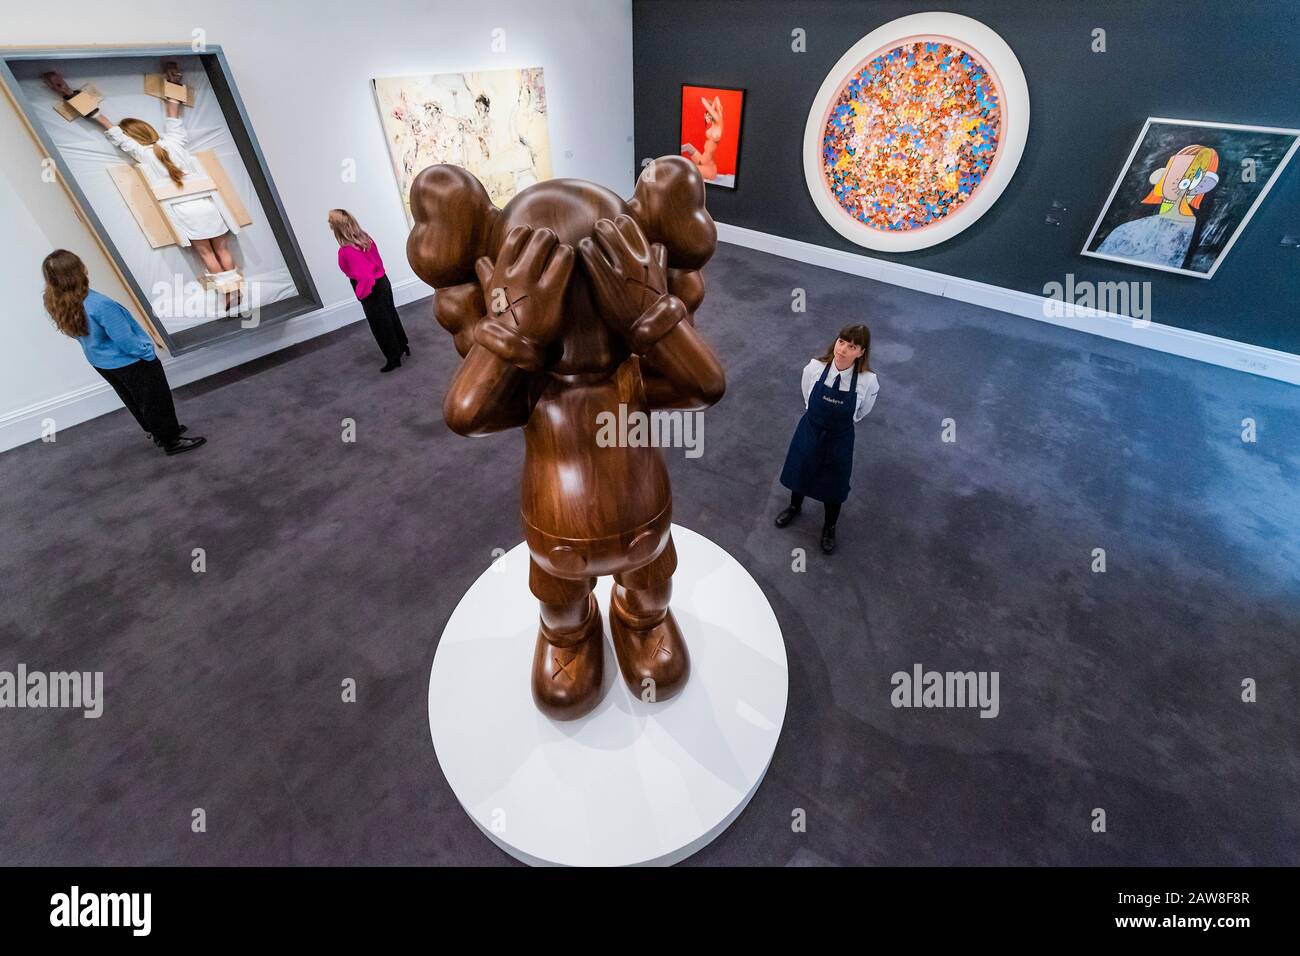 London, UK. 7th February, 2020. Kaws, At this Time, 2013, est £0.7-0.9m - Sotheby's previews its Contemporary Art Sale which takes place on 11th February 2020 in London. Credit: Guy Bell/Alamy Live News Stock Photo